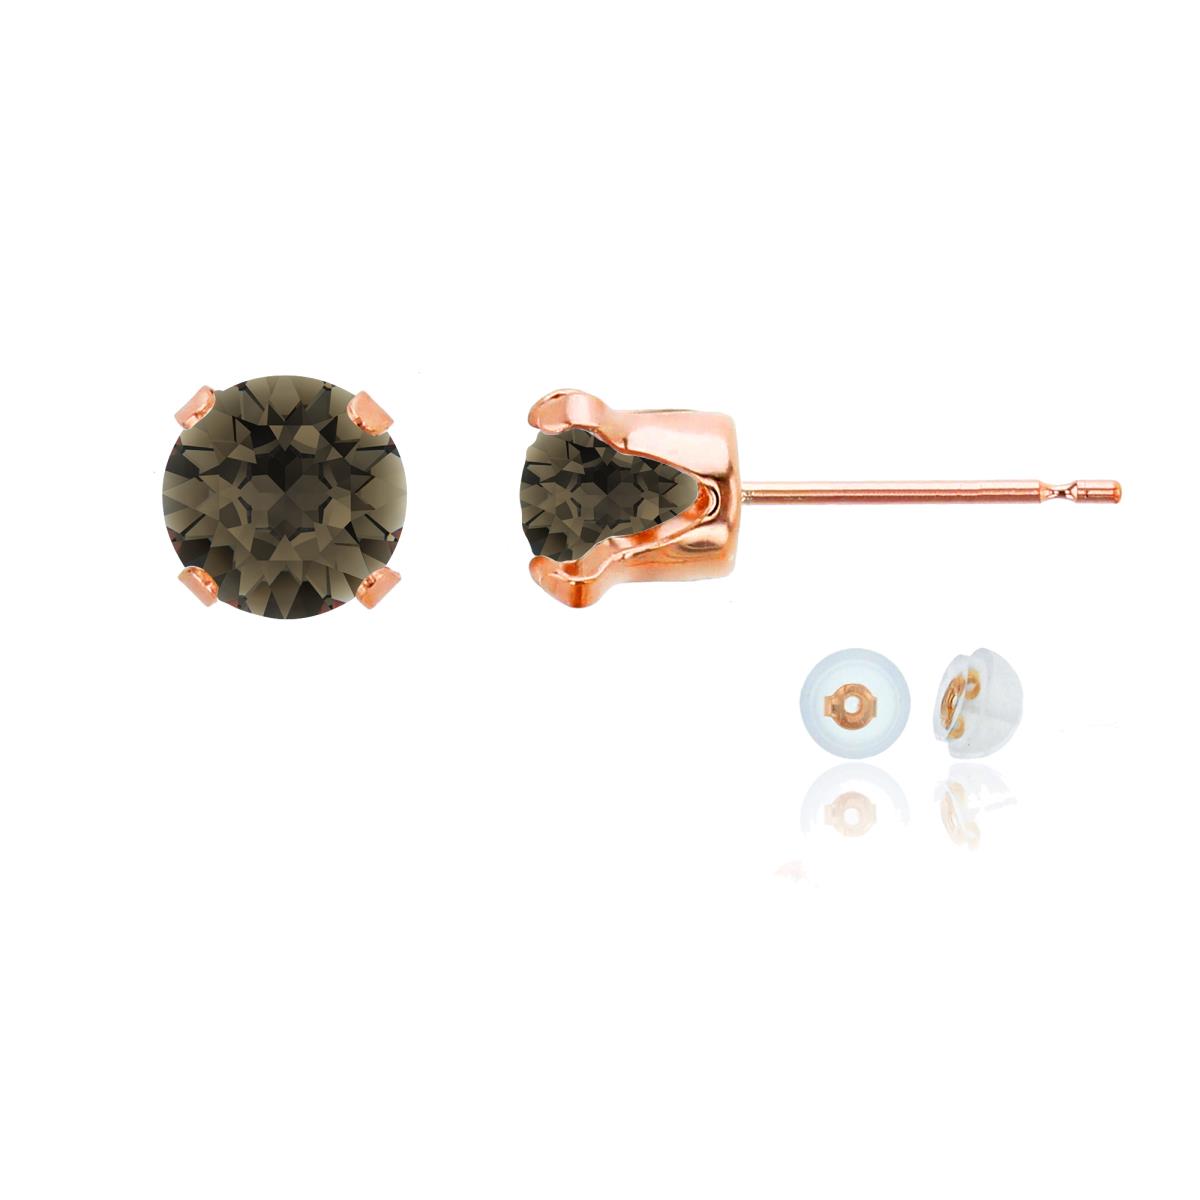 10K Rose Gold 6mm Round Smokey Quartz Stud Earring with Silicone Back